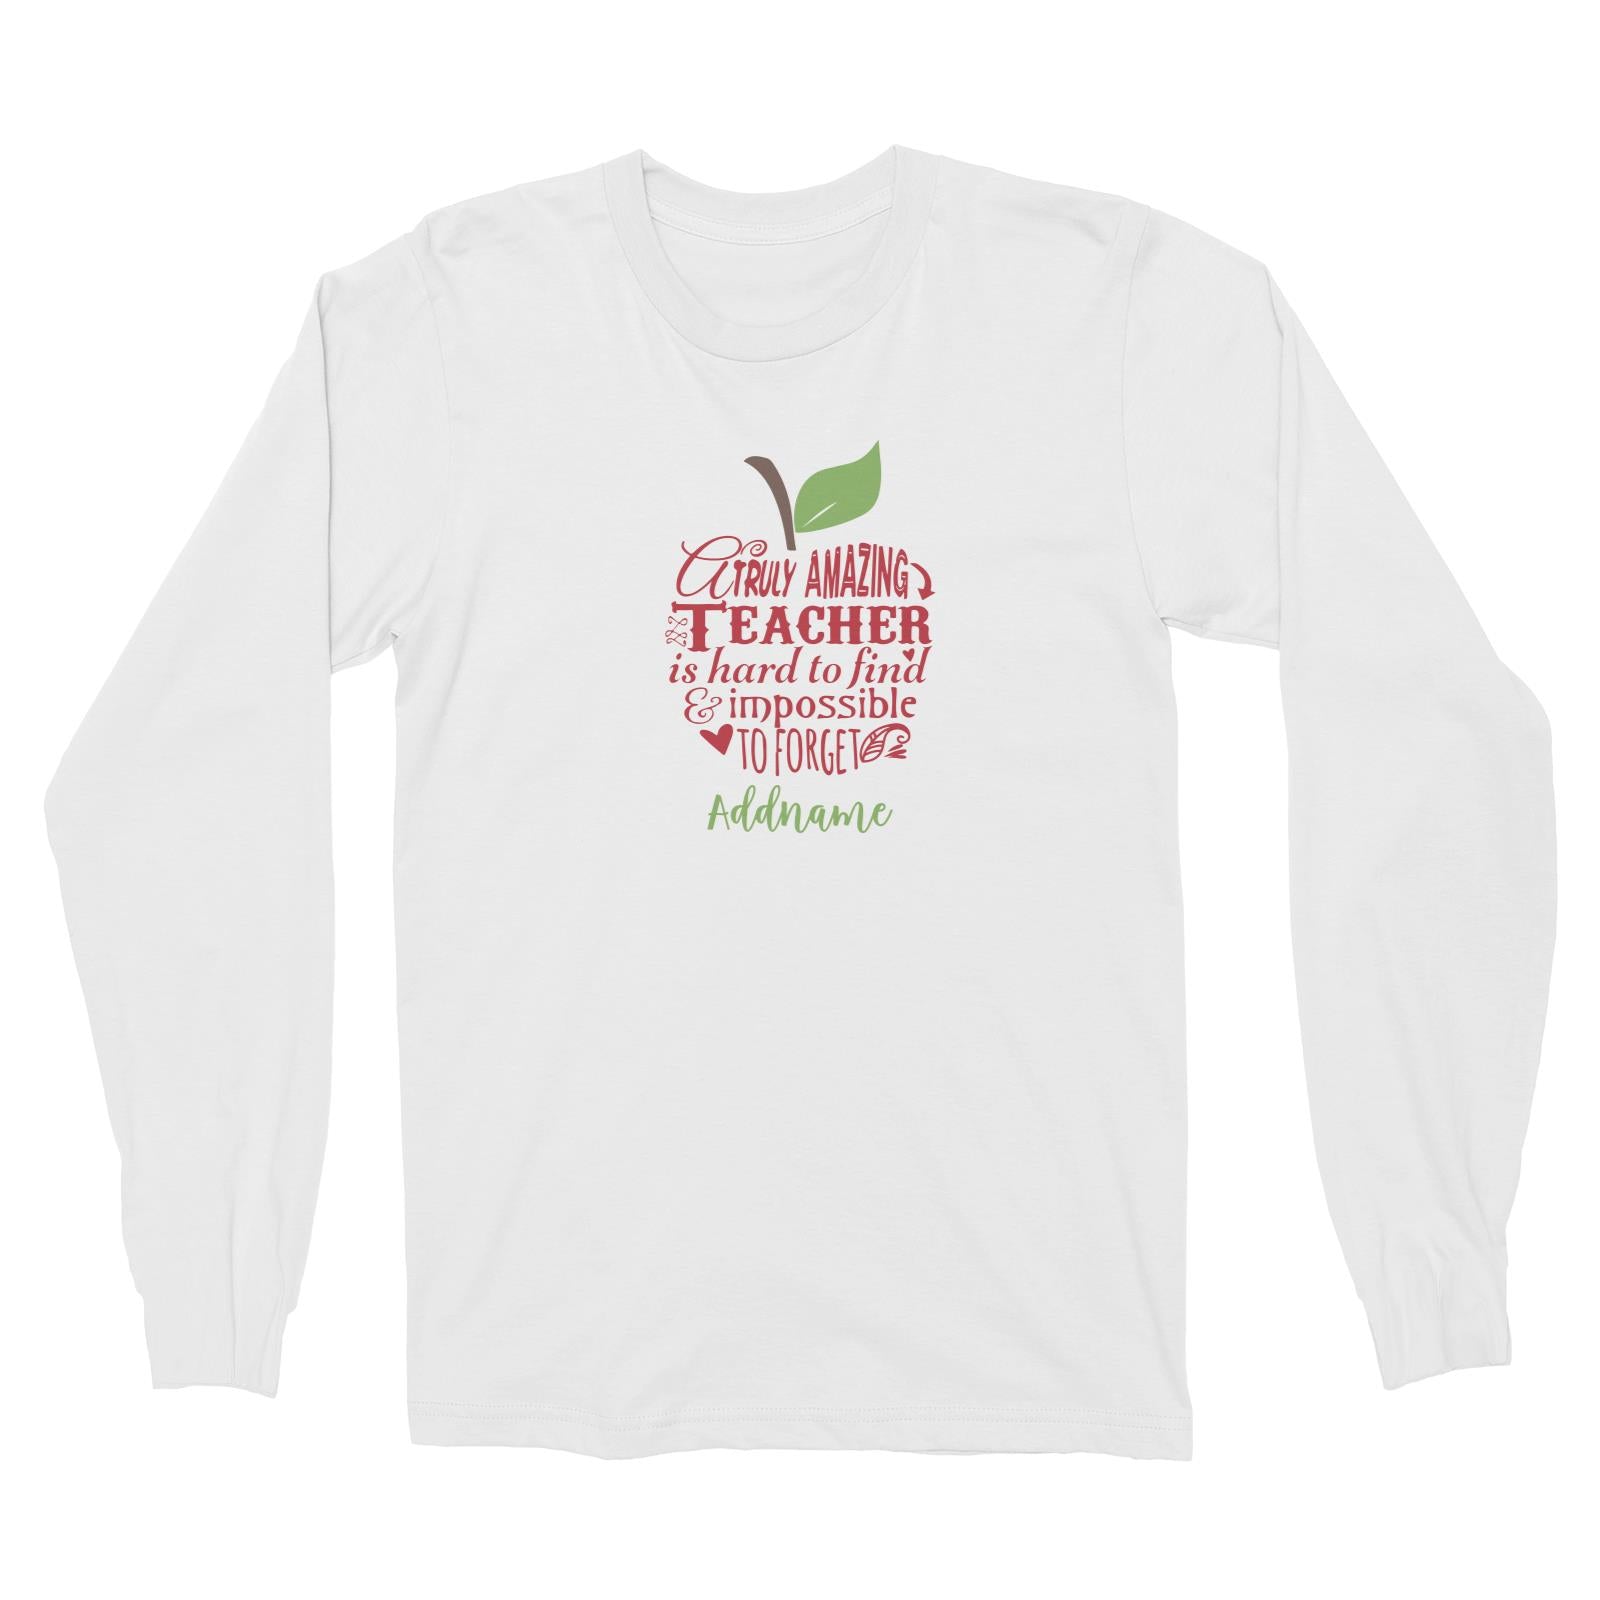 Teacher Apple Truly Amazing Teacher is Had To Find & Impossible To Forget Addname Long Sleeve Unisex T-Shirt